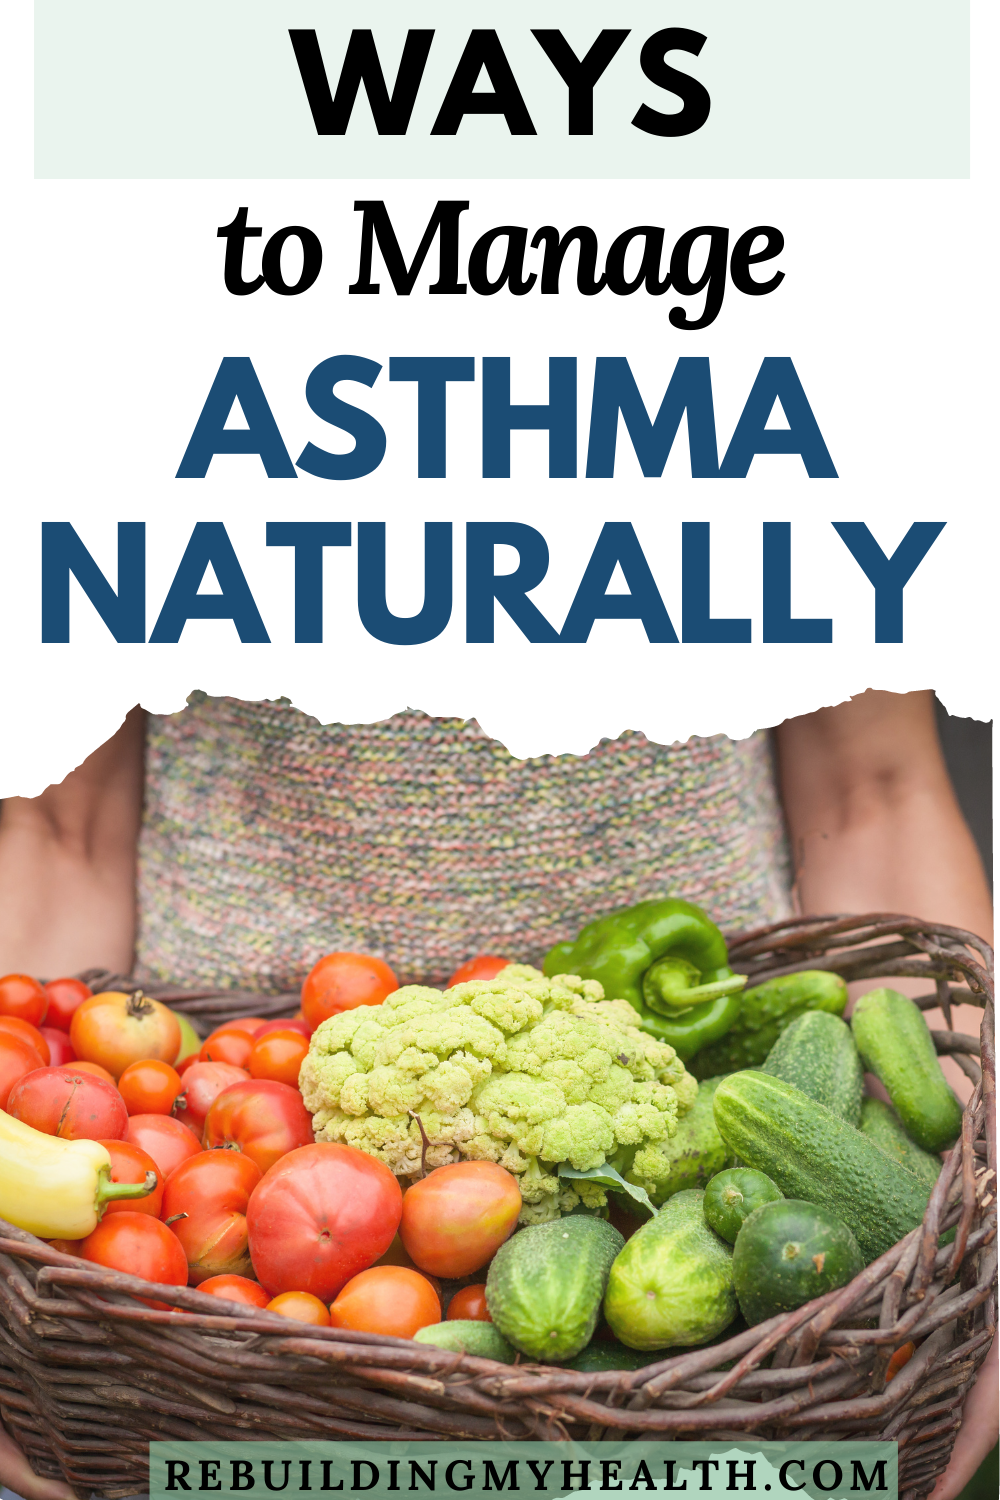 Learn how to manage asthma with diet, environment, alternative treatments and exercise.